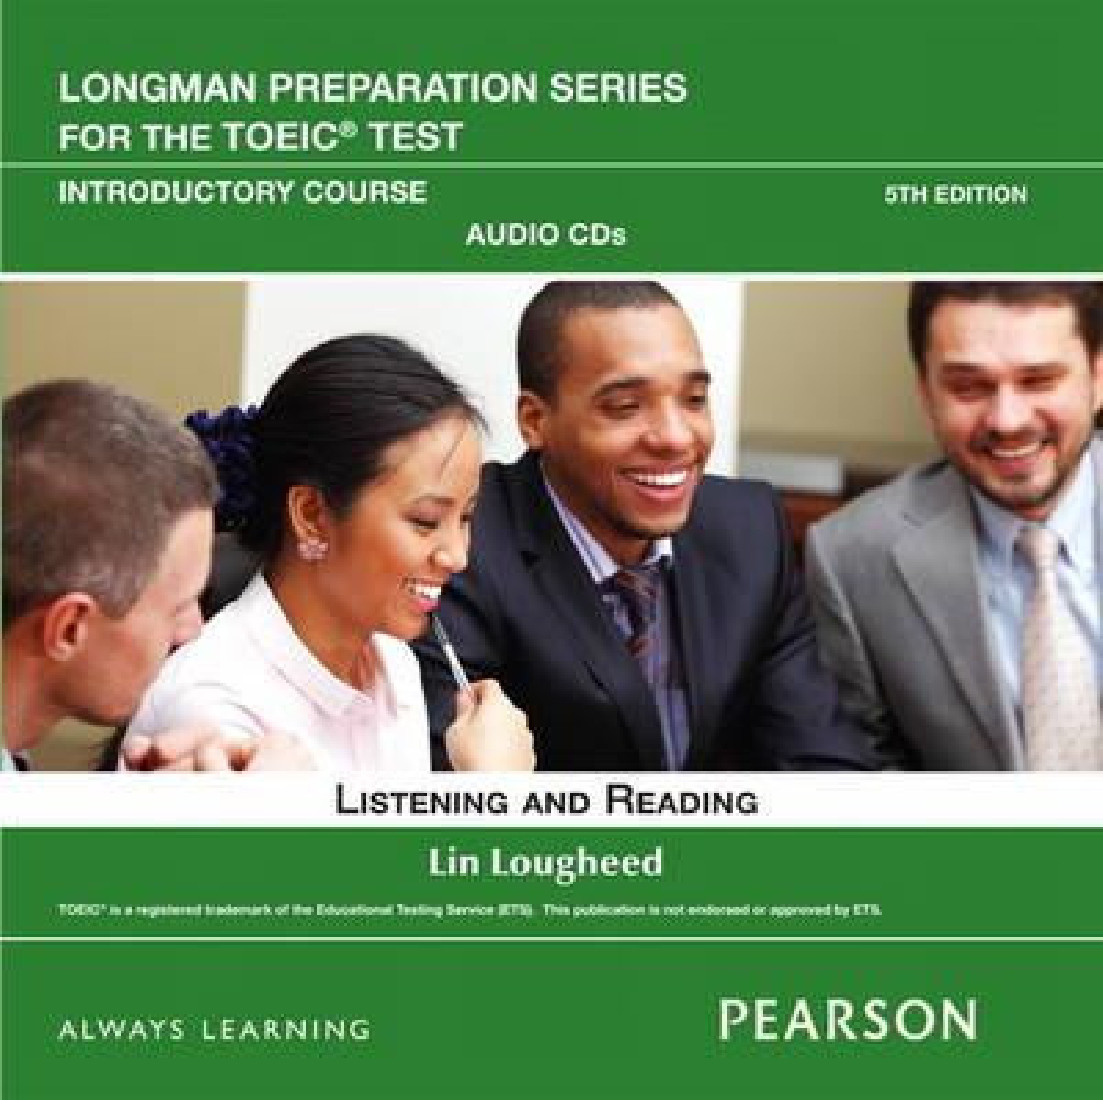 LONGMAN PREP. SERIES FOR THE TOEIC AUDIO CD INTRODUCTORY 5TH ED